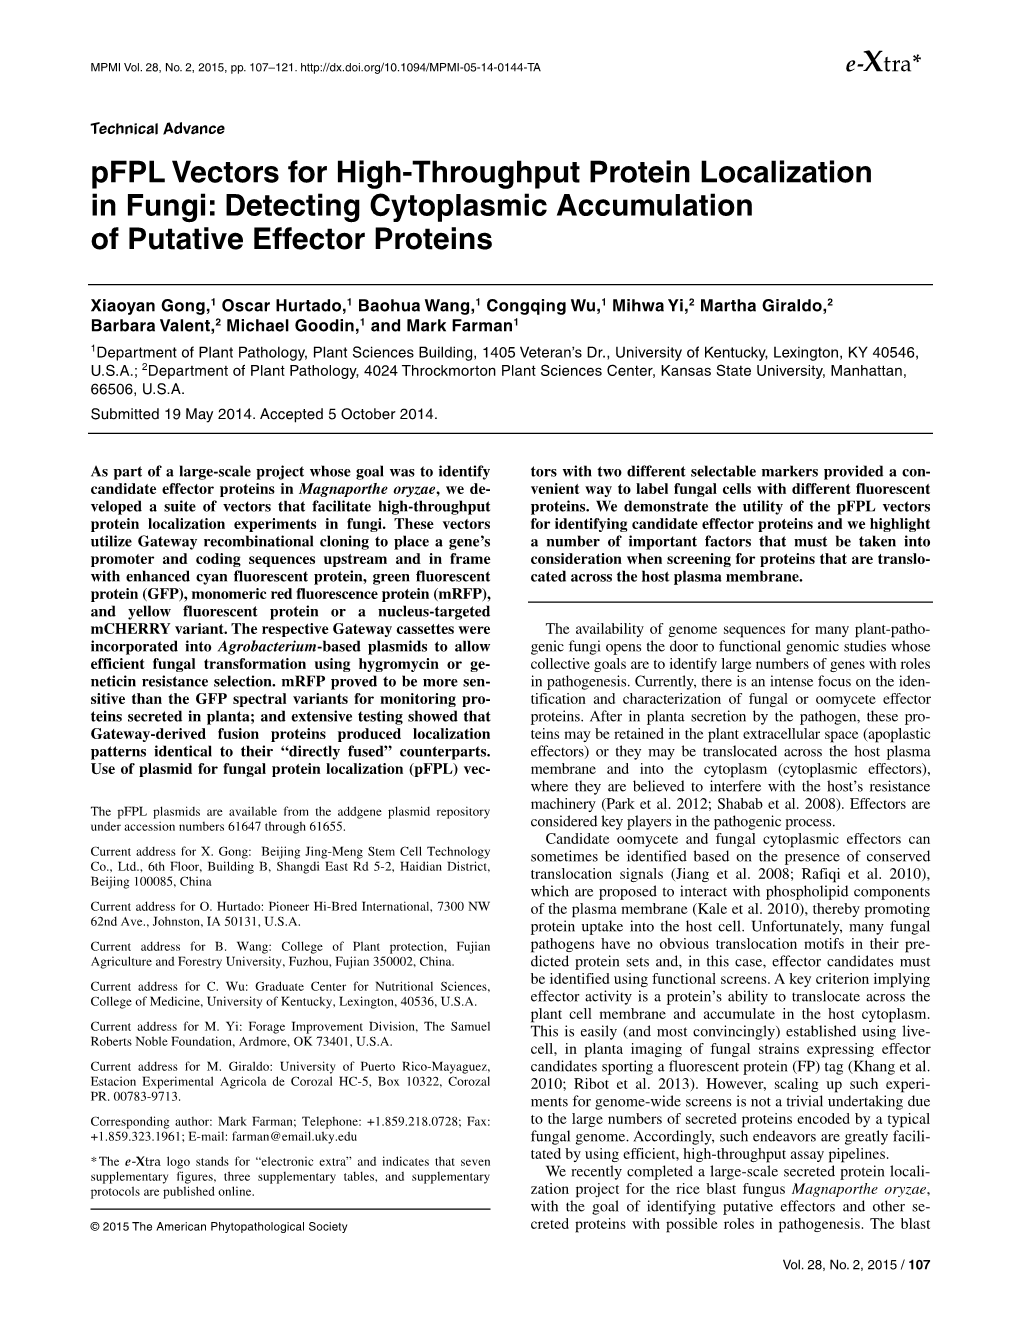 Pfpl Vectors for High-Throughput Protein Localization in Fungi: Detecting Cytoplasmic Accumulation of Putative Effector Proteins